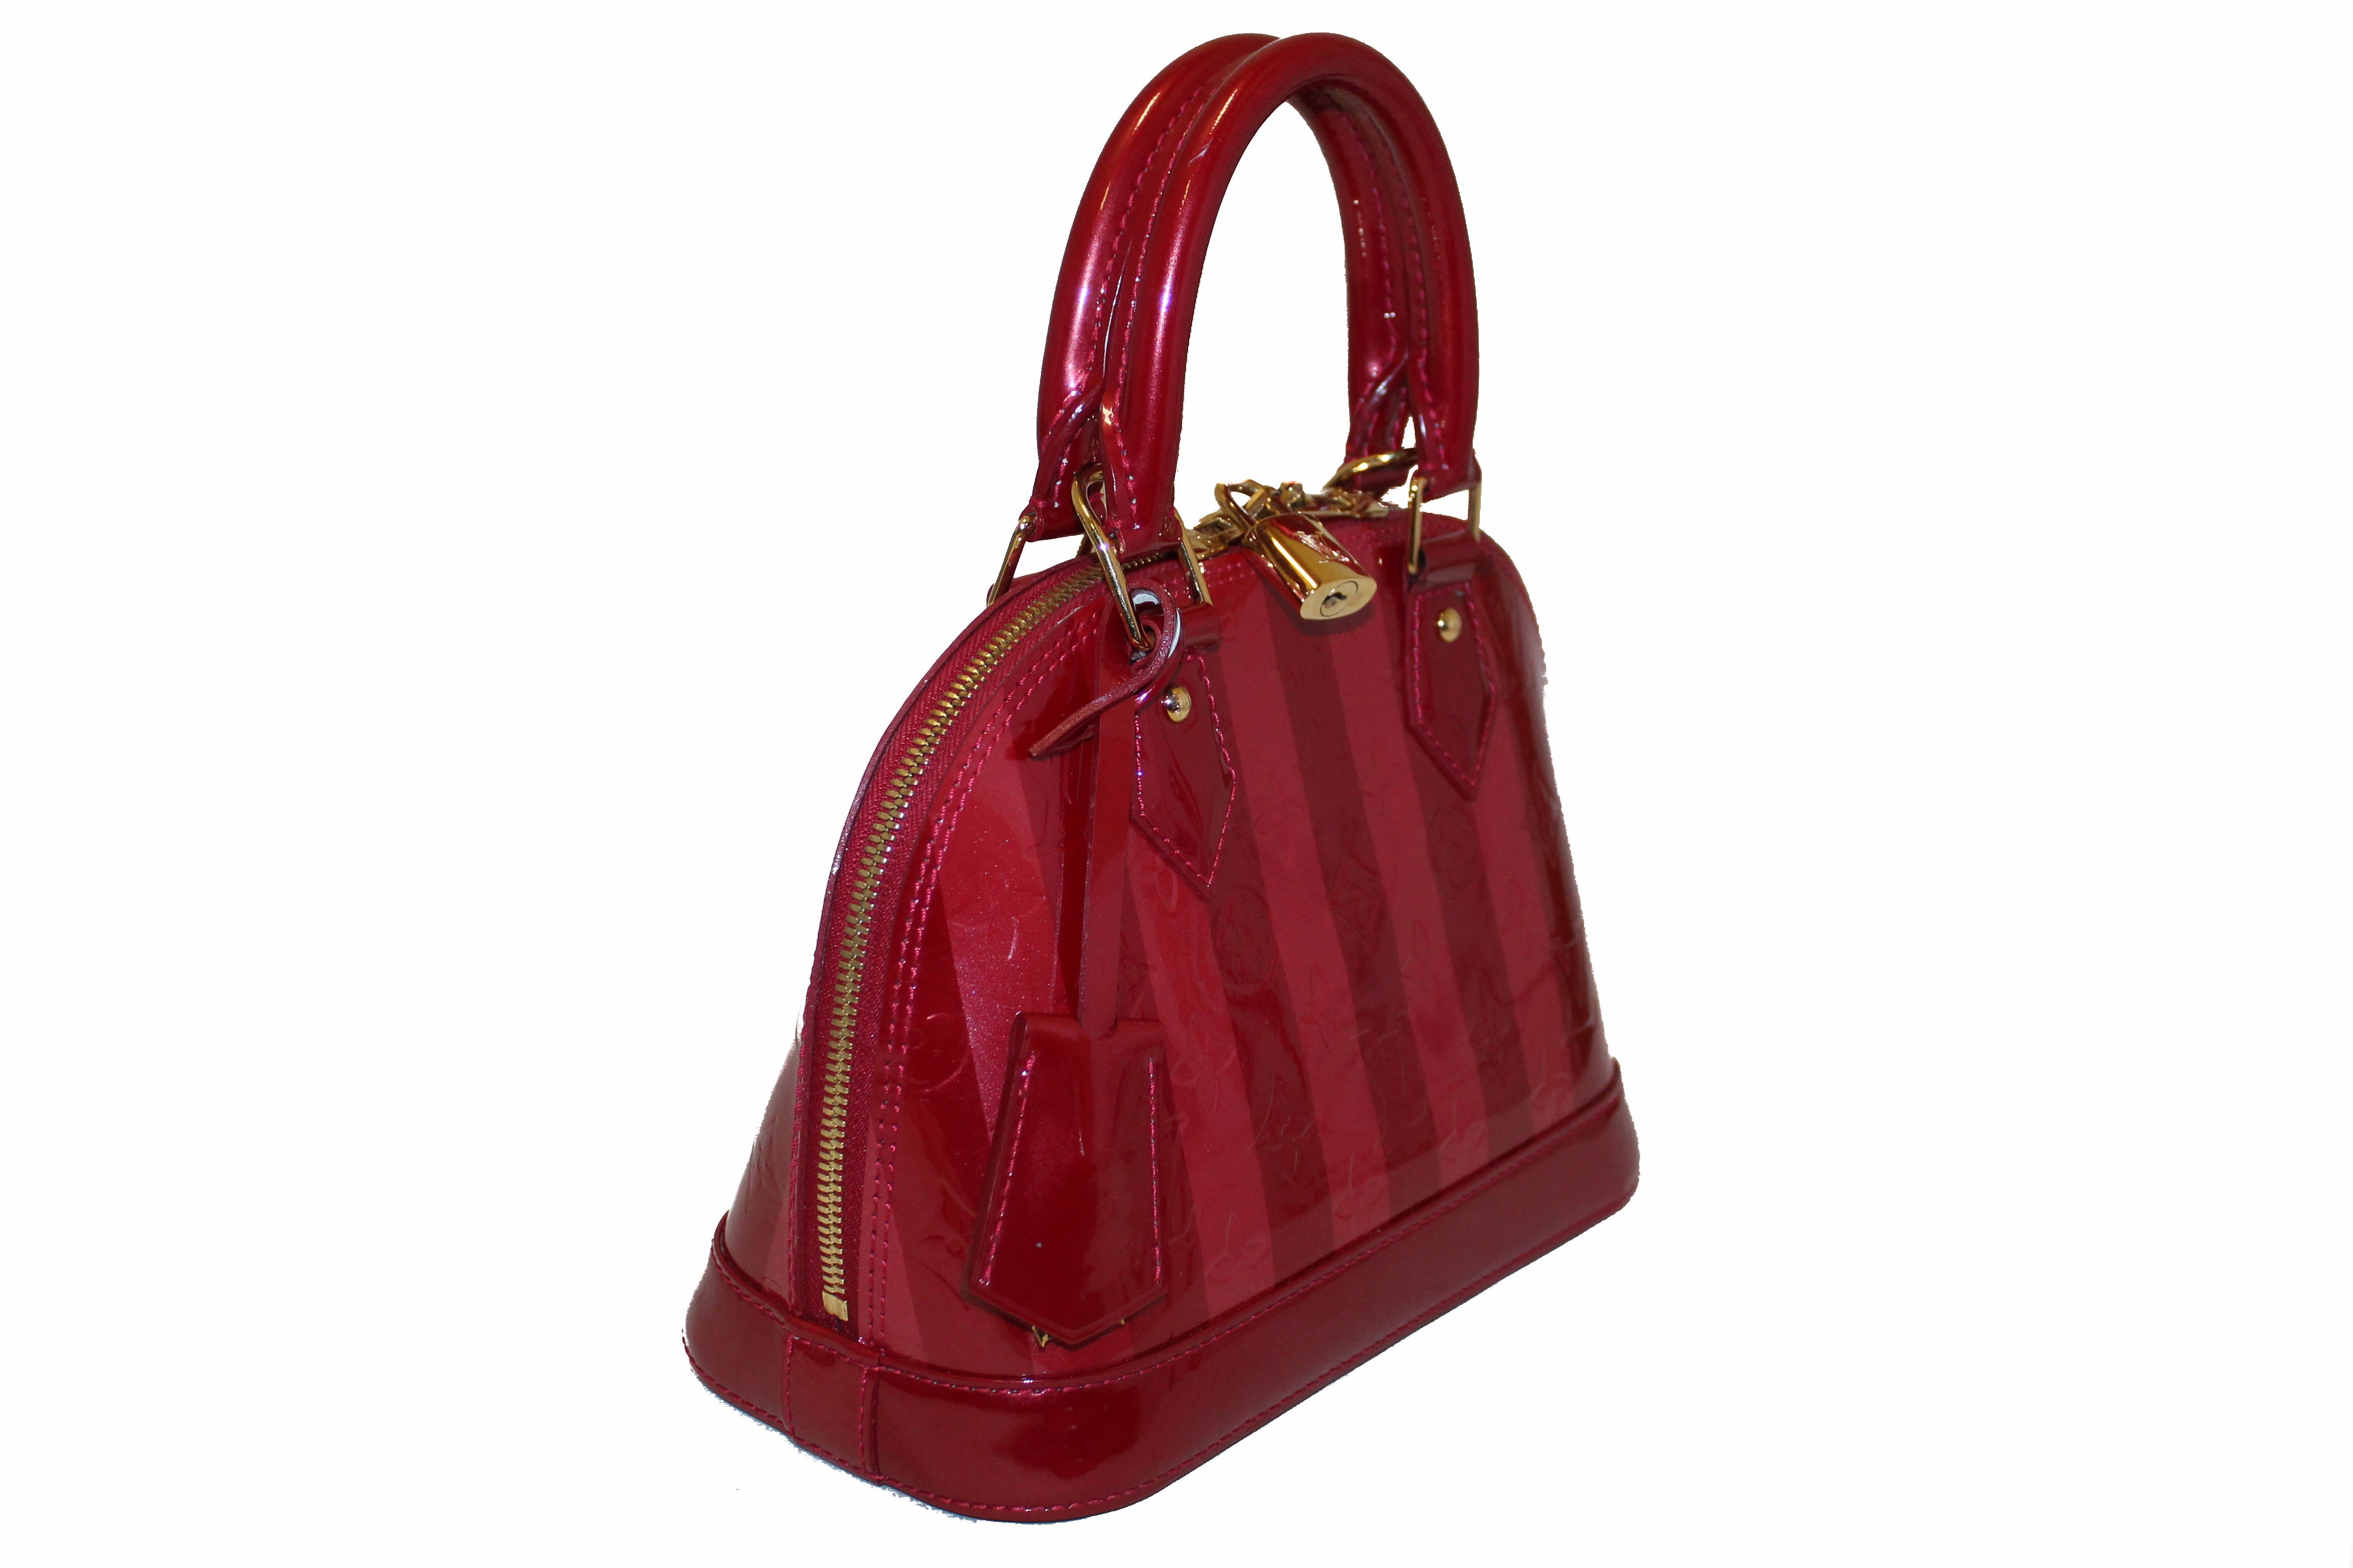 LOUIS VUITTON Vernis Alma MM Pomme D'Amour Red Patent Leather Tote Bag +  Strap